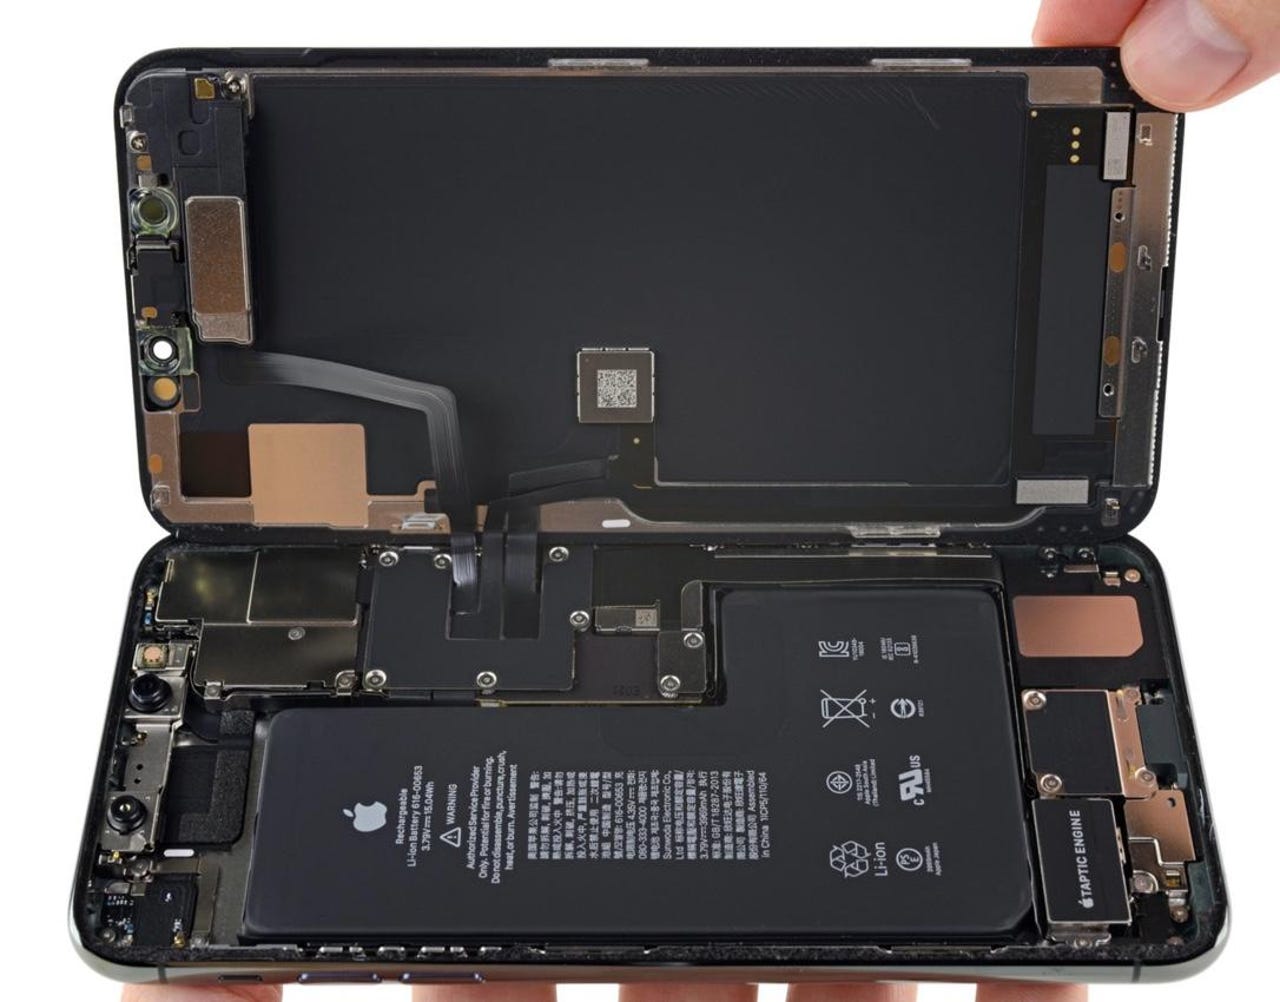 Inside the iPhone 11 Pro Max